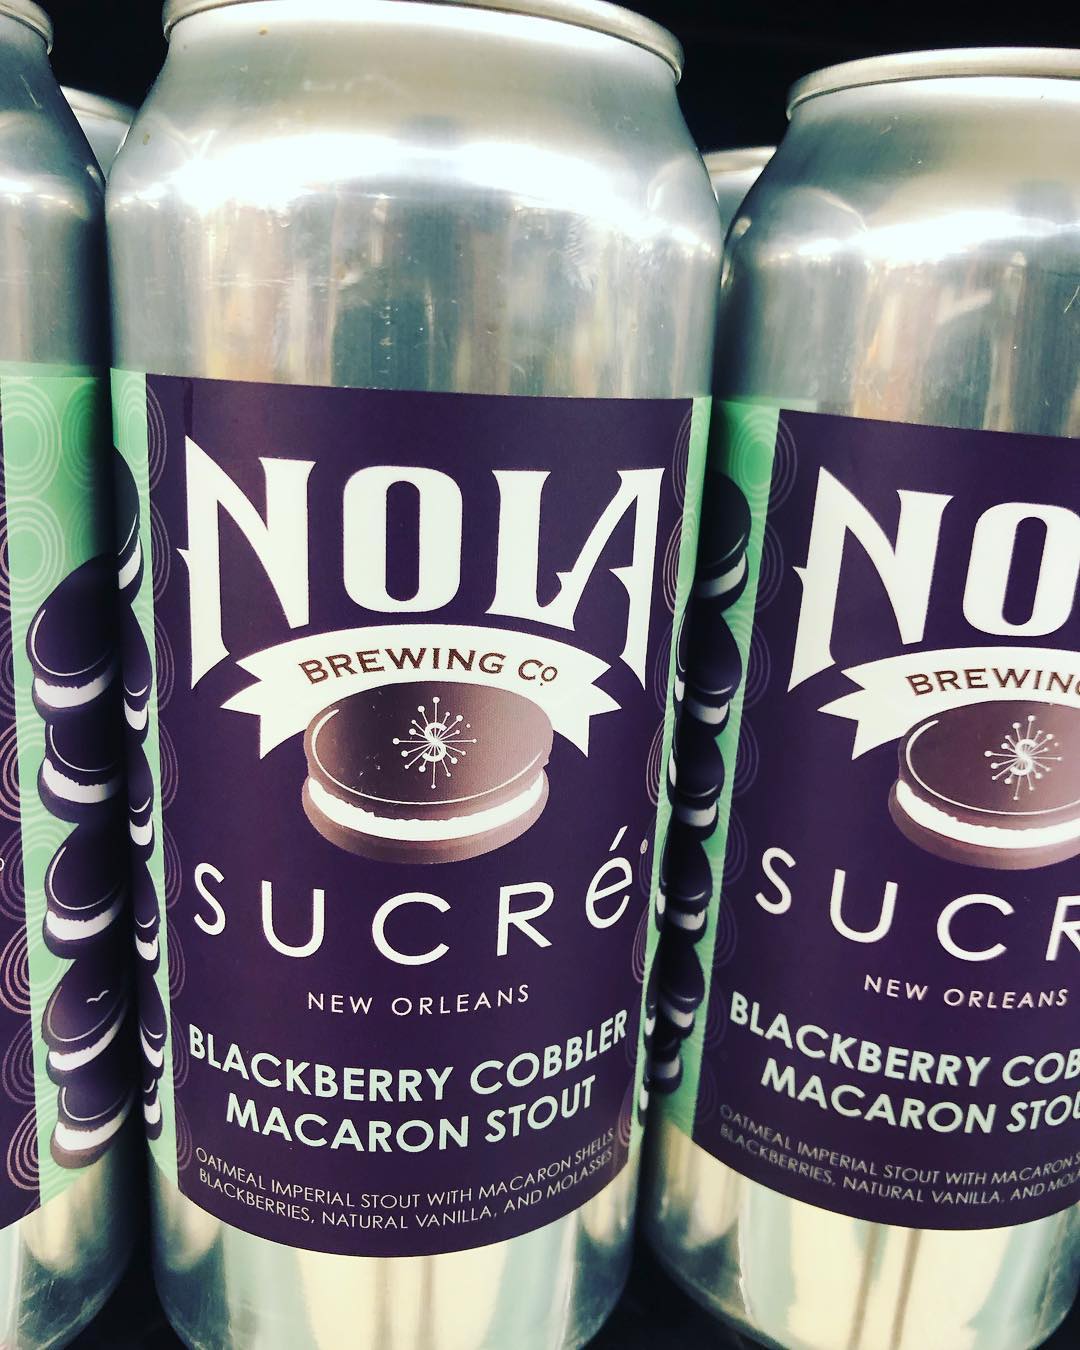 @nolabrewing and @sucreneworleans blackberry cobbler macaron stout is now available at our #midcitybr location! Limit…